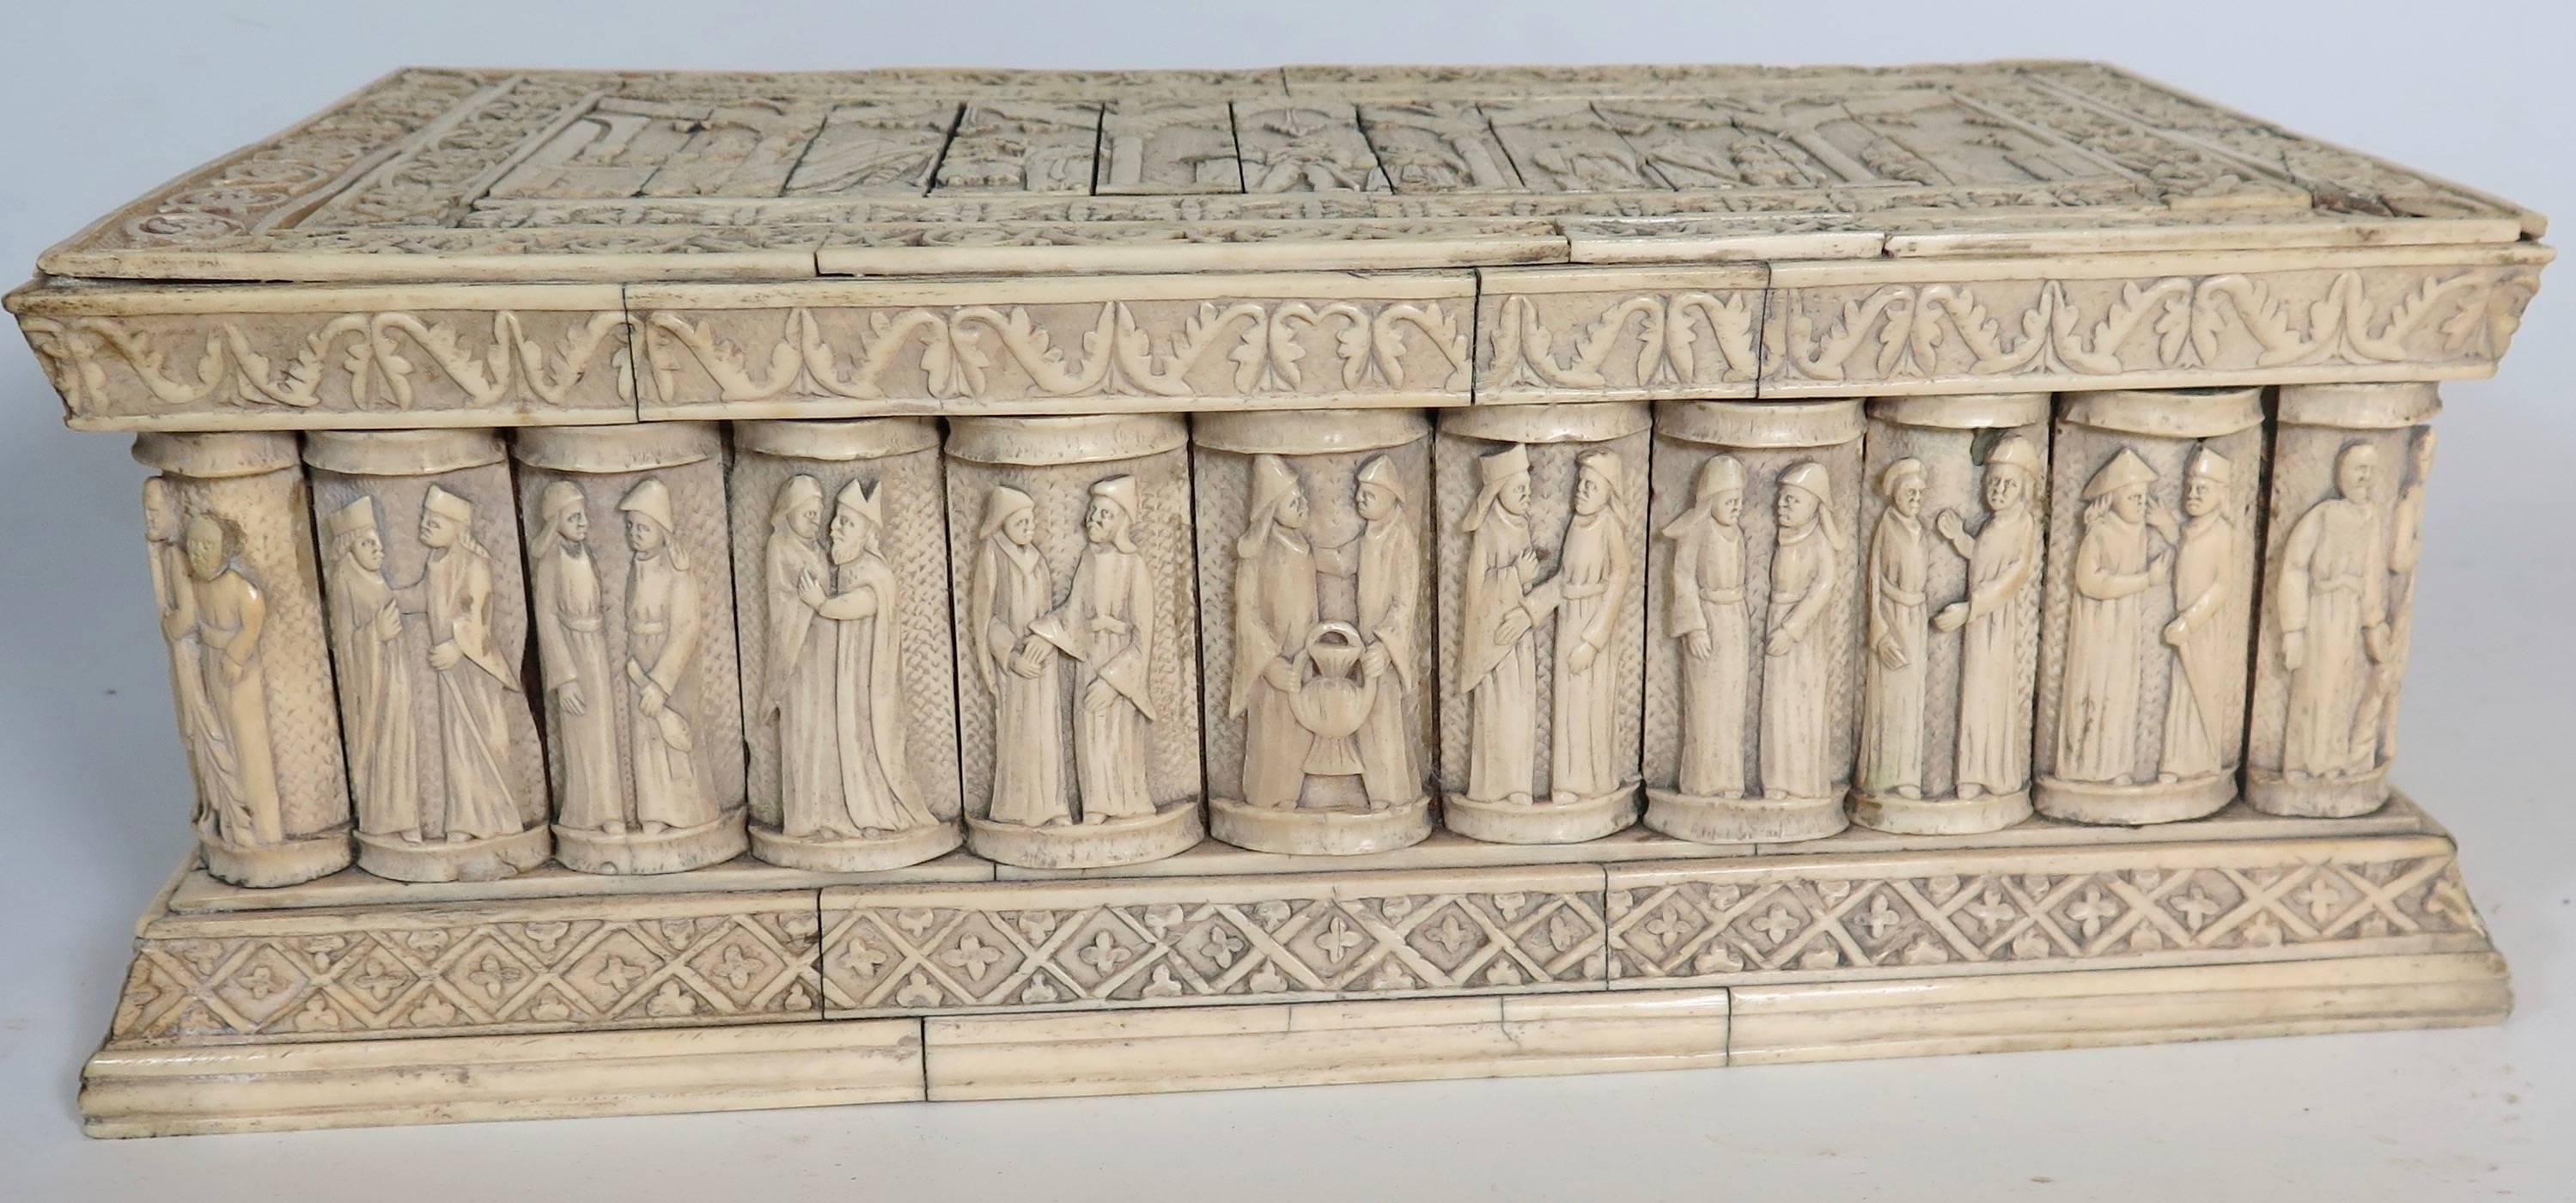 Exceptional Italian Embriachi marriage casket. The top slides from left to right. Similar caskets are seen in museums throughout the world. The box is composed of wood with carved bone pieces attached to surface.
Various Christian themes adorn the